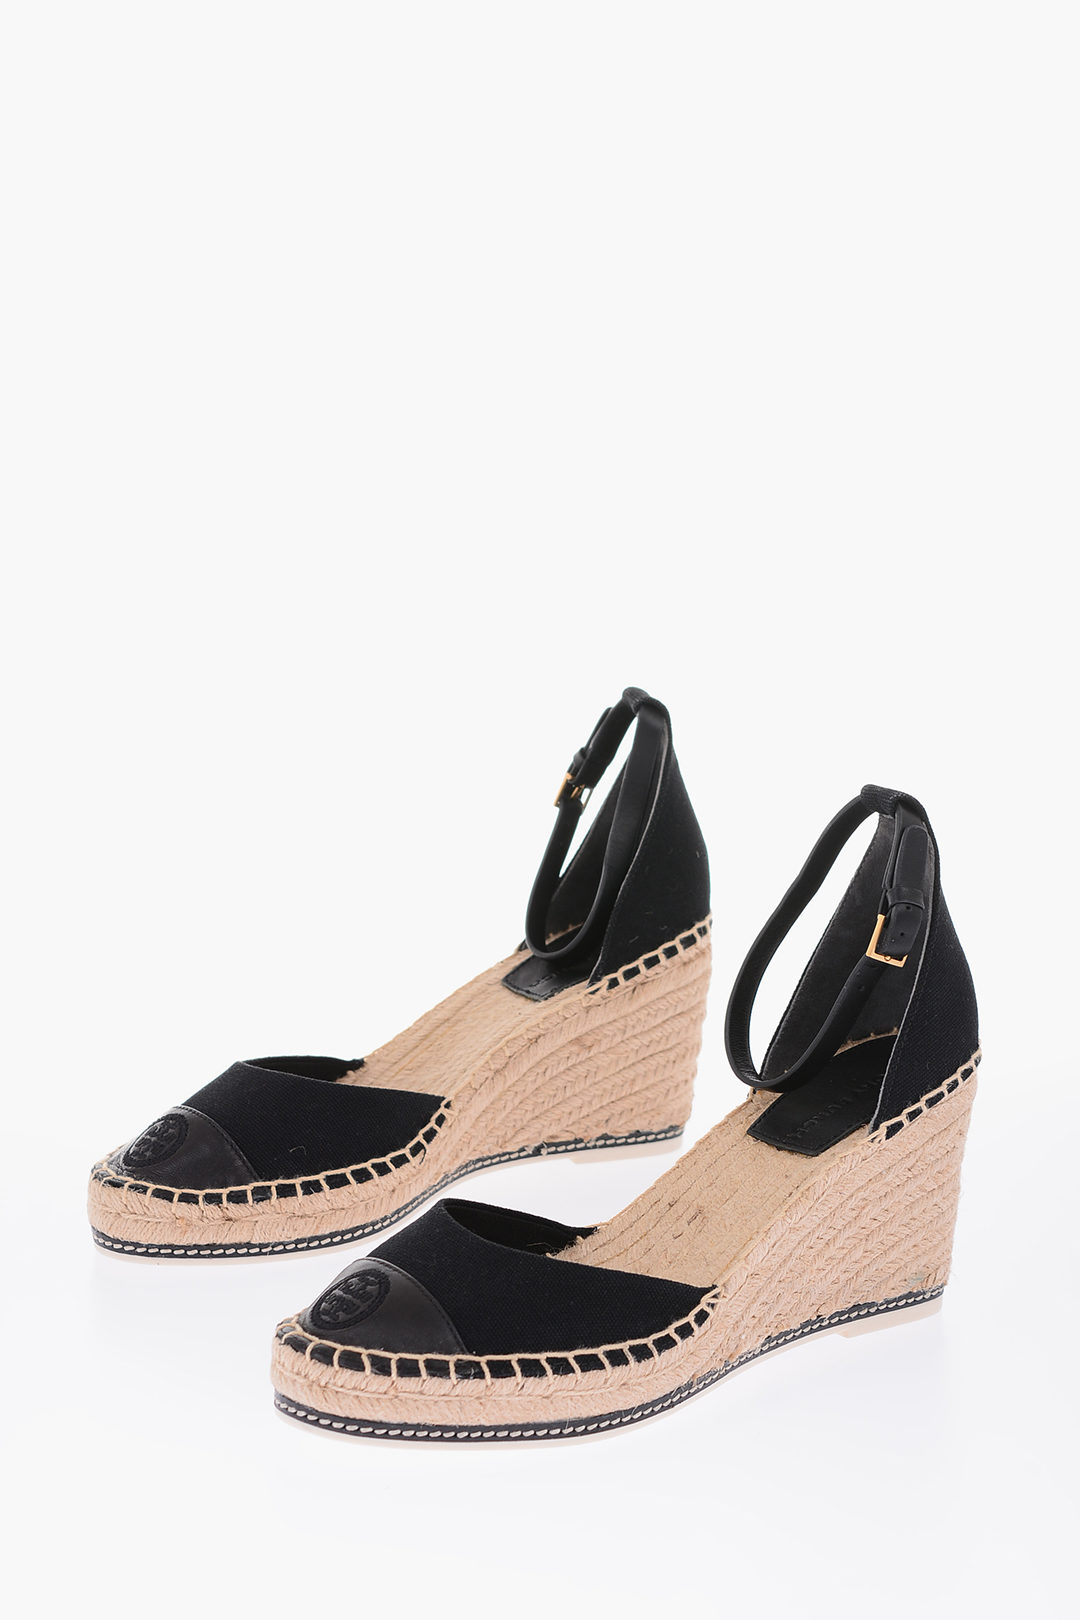 Tory Burch 8.5cm and fabric Wedge espadrilles women - Glamood Outlet